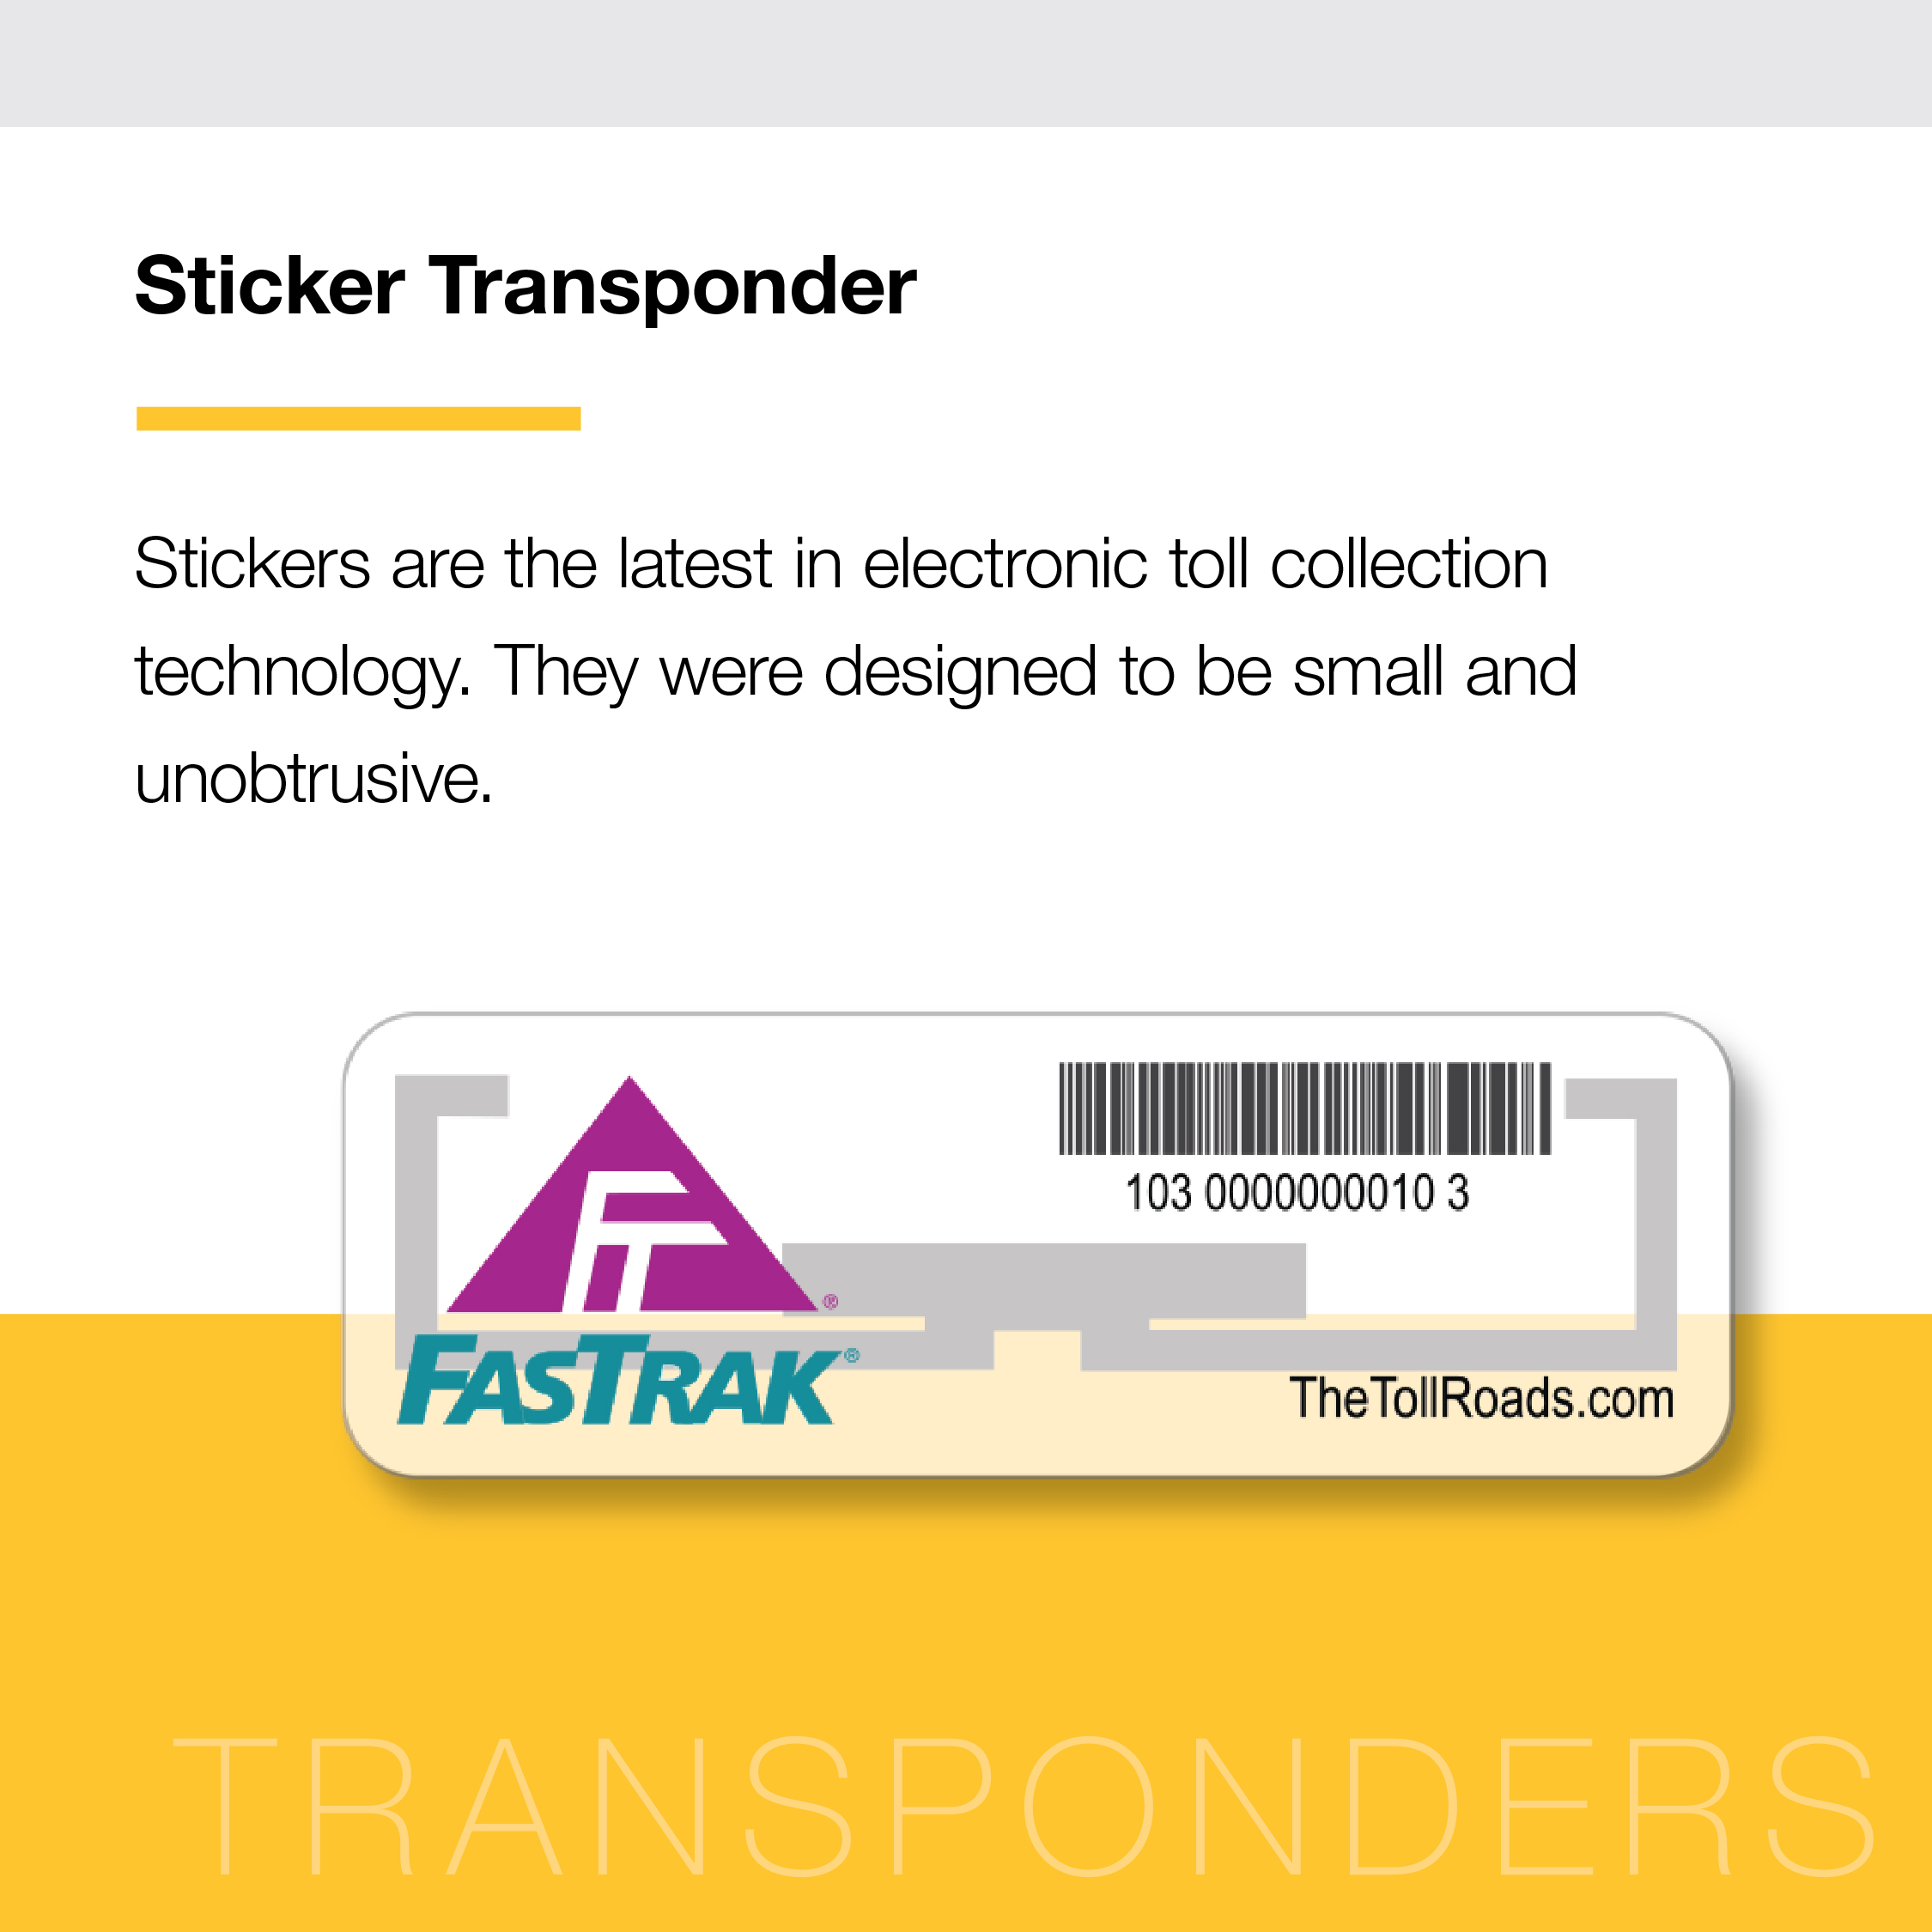 Graphic with text. Text reads "Sticker Transponder Stickers are the latest in electronic toll collection technology. They were designed to be small and ubobtrusive." Image of a Sticker Transponder.